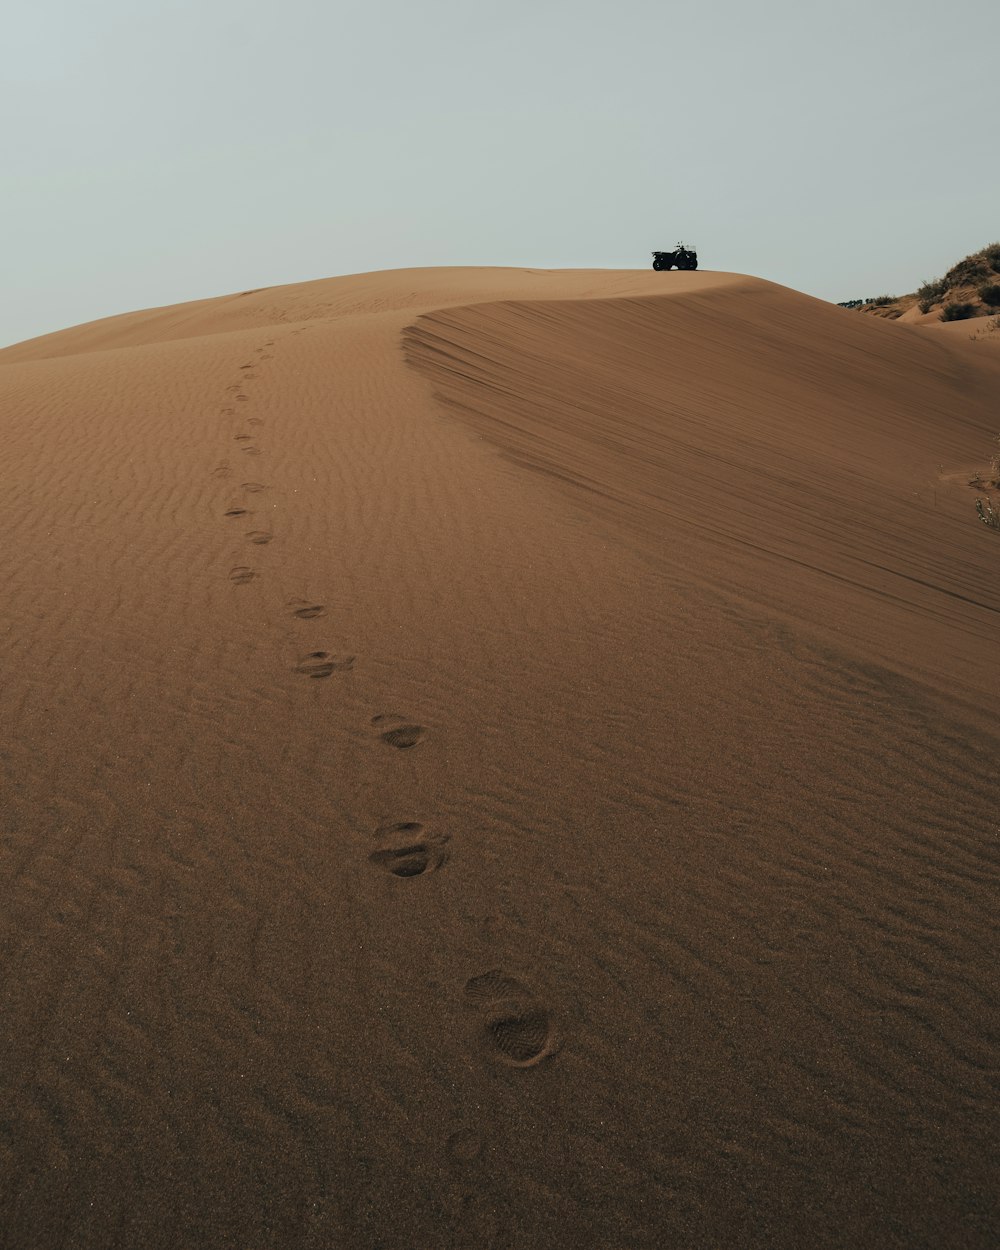 a jeep driving down a sandy hill with footprints in the sand